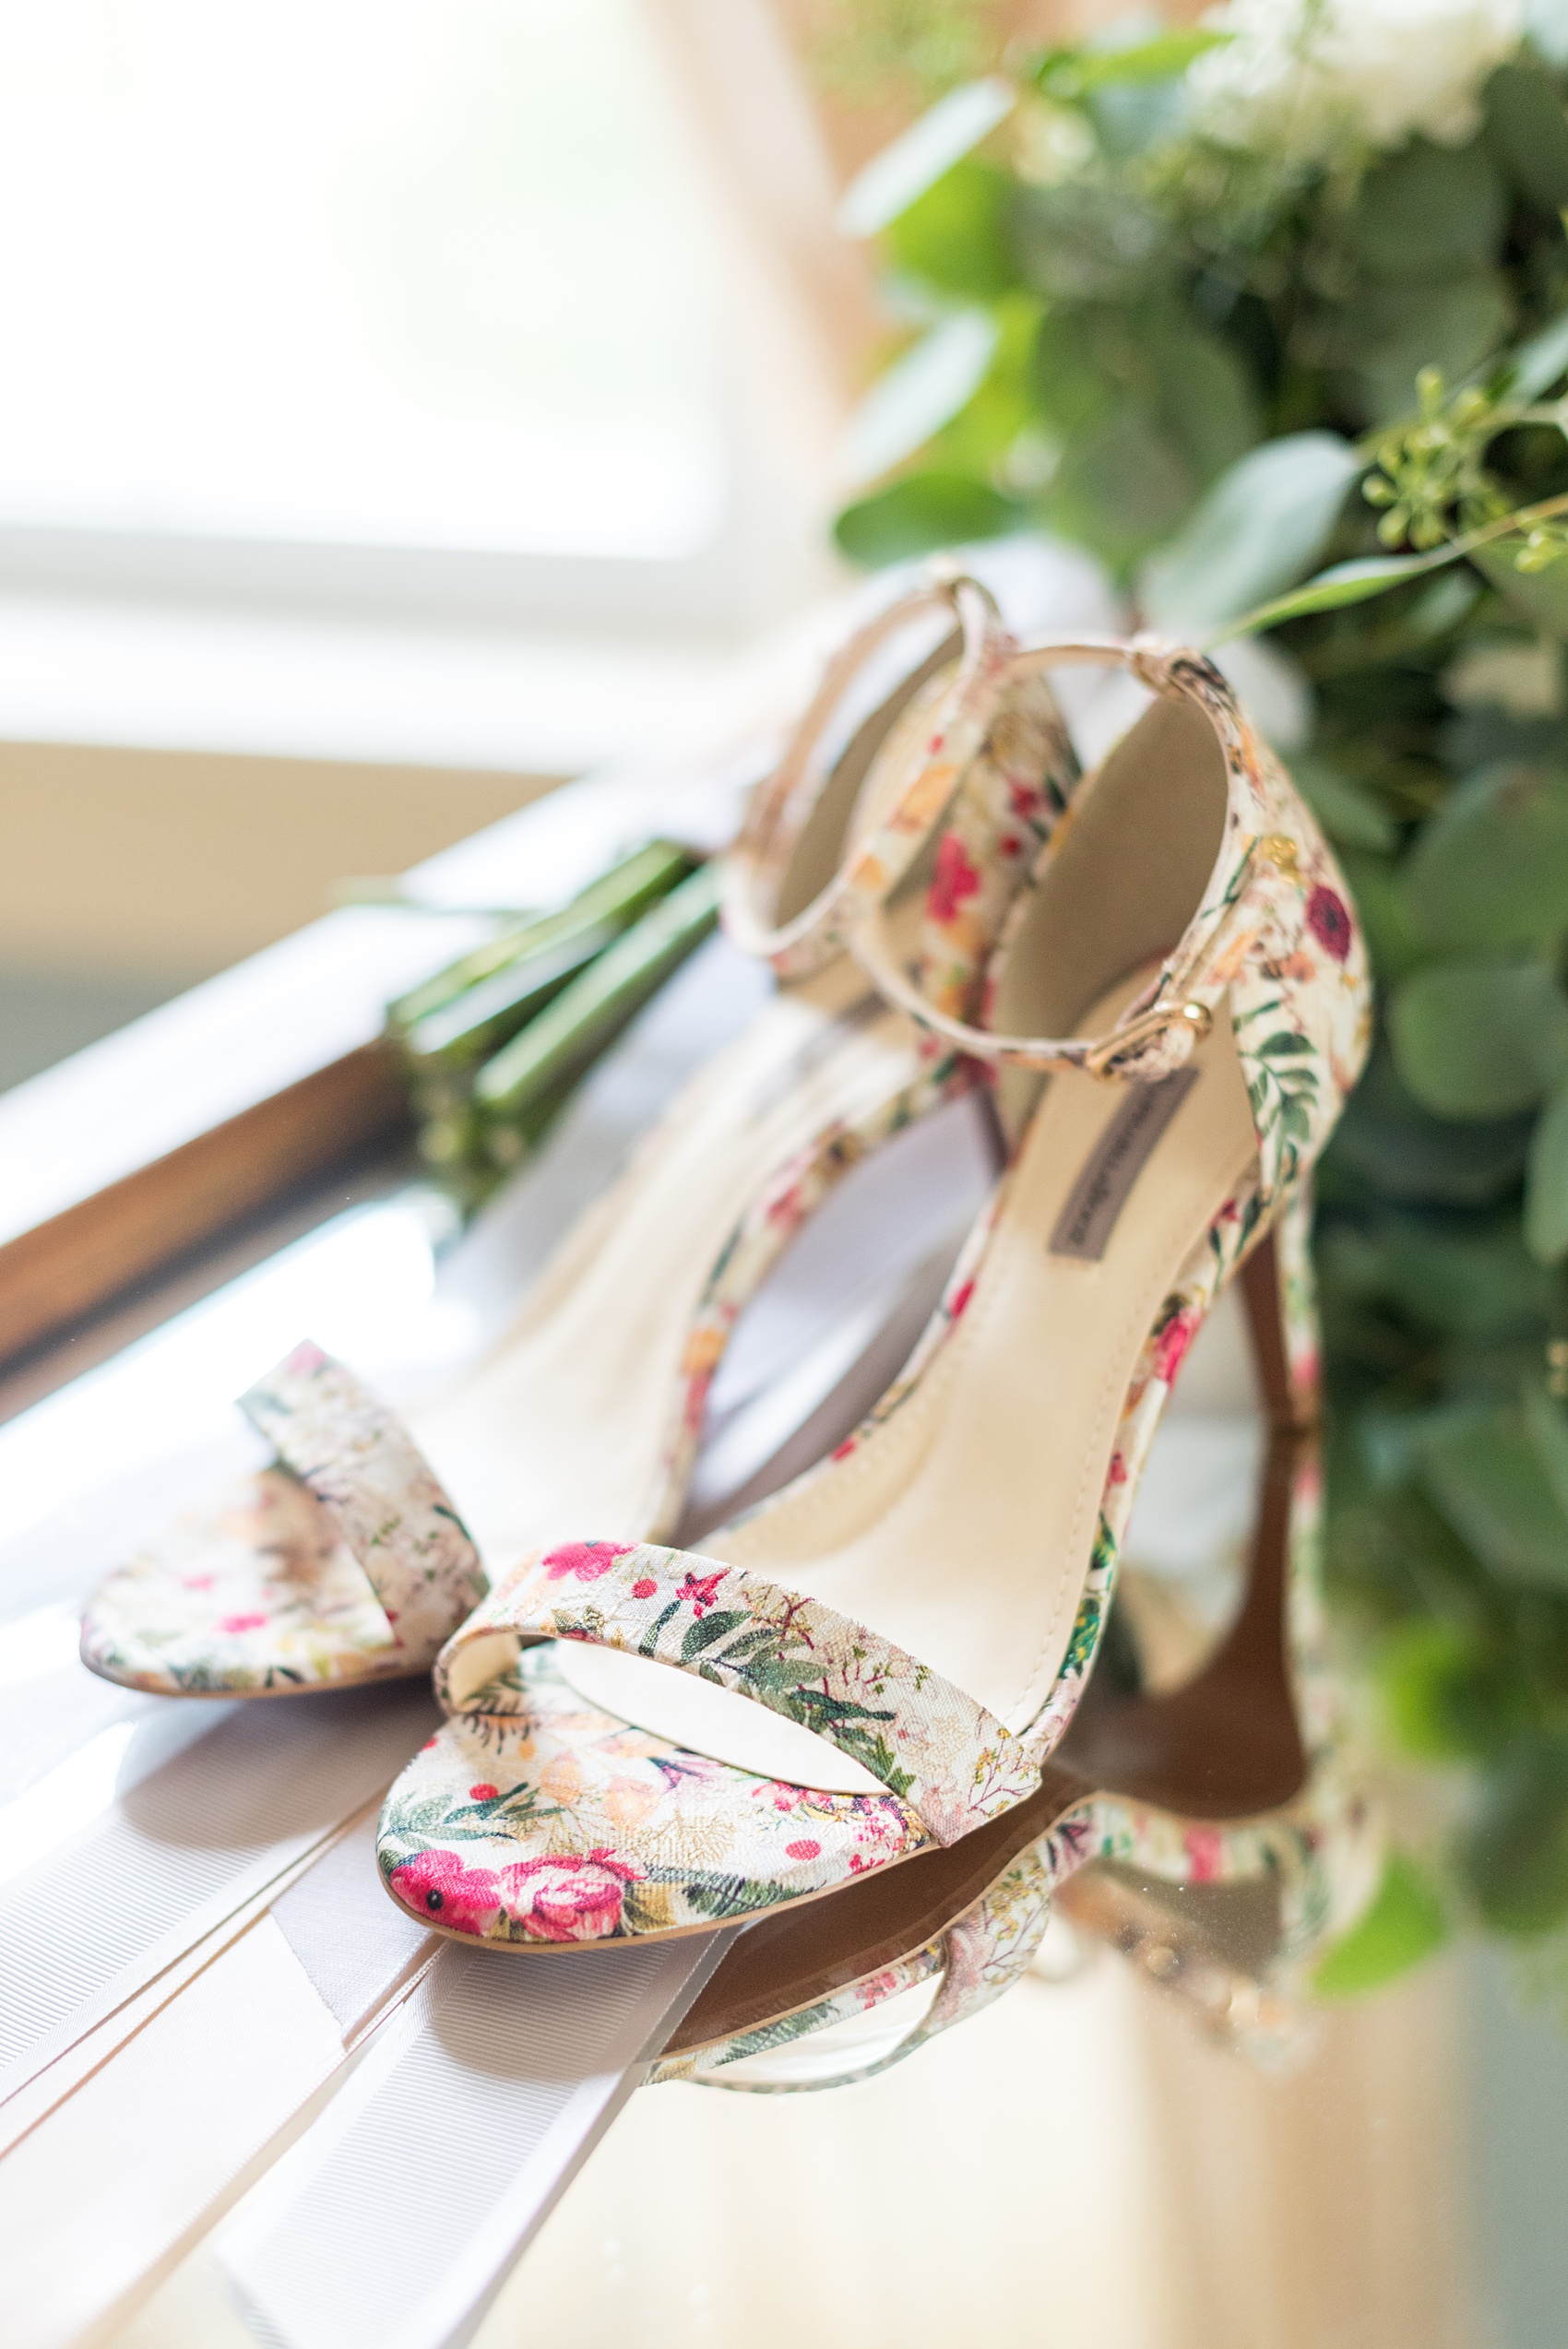 Wedding photos at Crabtree's Kittle House in Chappaqua, New York by Mikkel Paige Photography. The bride wore fun flower pattern shoes for her wedding day at this historic Westchester County venue very close to NYC. Click through to see more detail photos from this gorgeous day! #mikkelpaige #CrabtreesKittleHouse #WestchesterWeddingVenues #WestchesterWedding #summerwedding #weddingdetails #bride #weddingdetails #weddingshoes #floralbrideshoes #floralweddingdetails #patternweddingshoes #historichome 